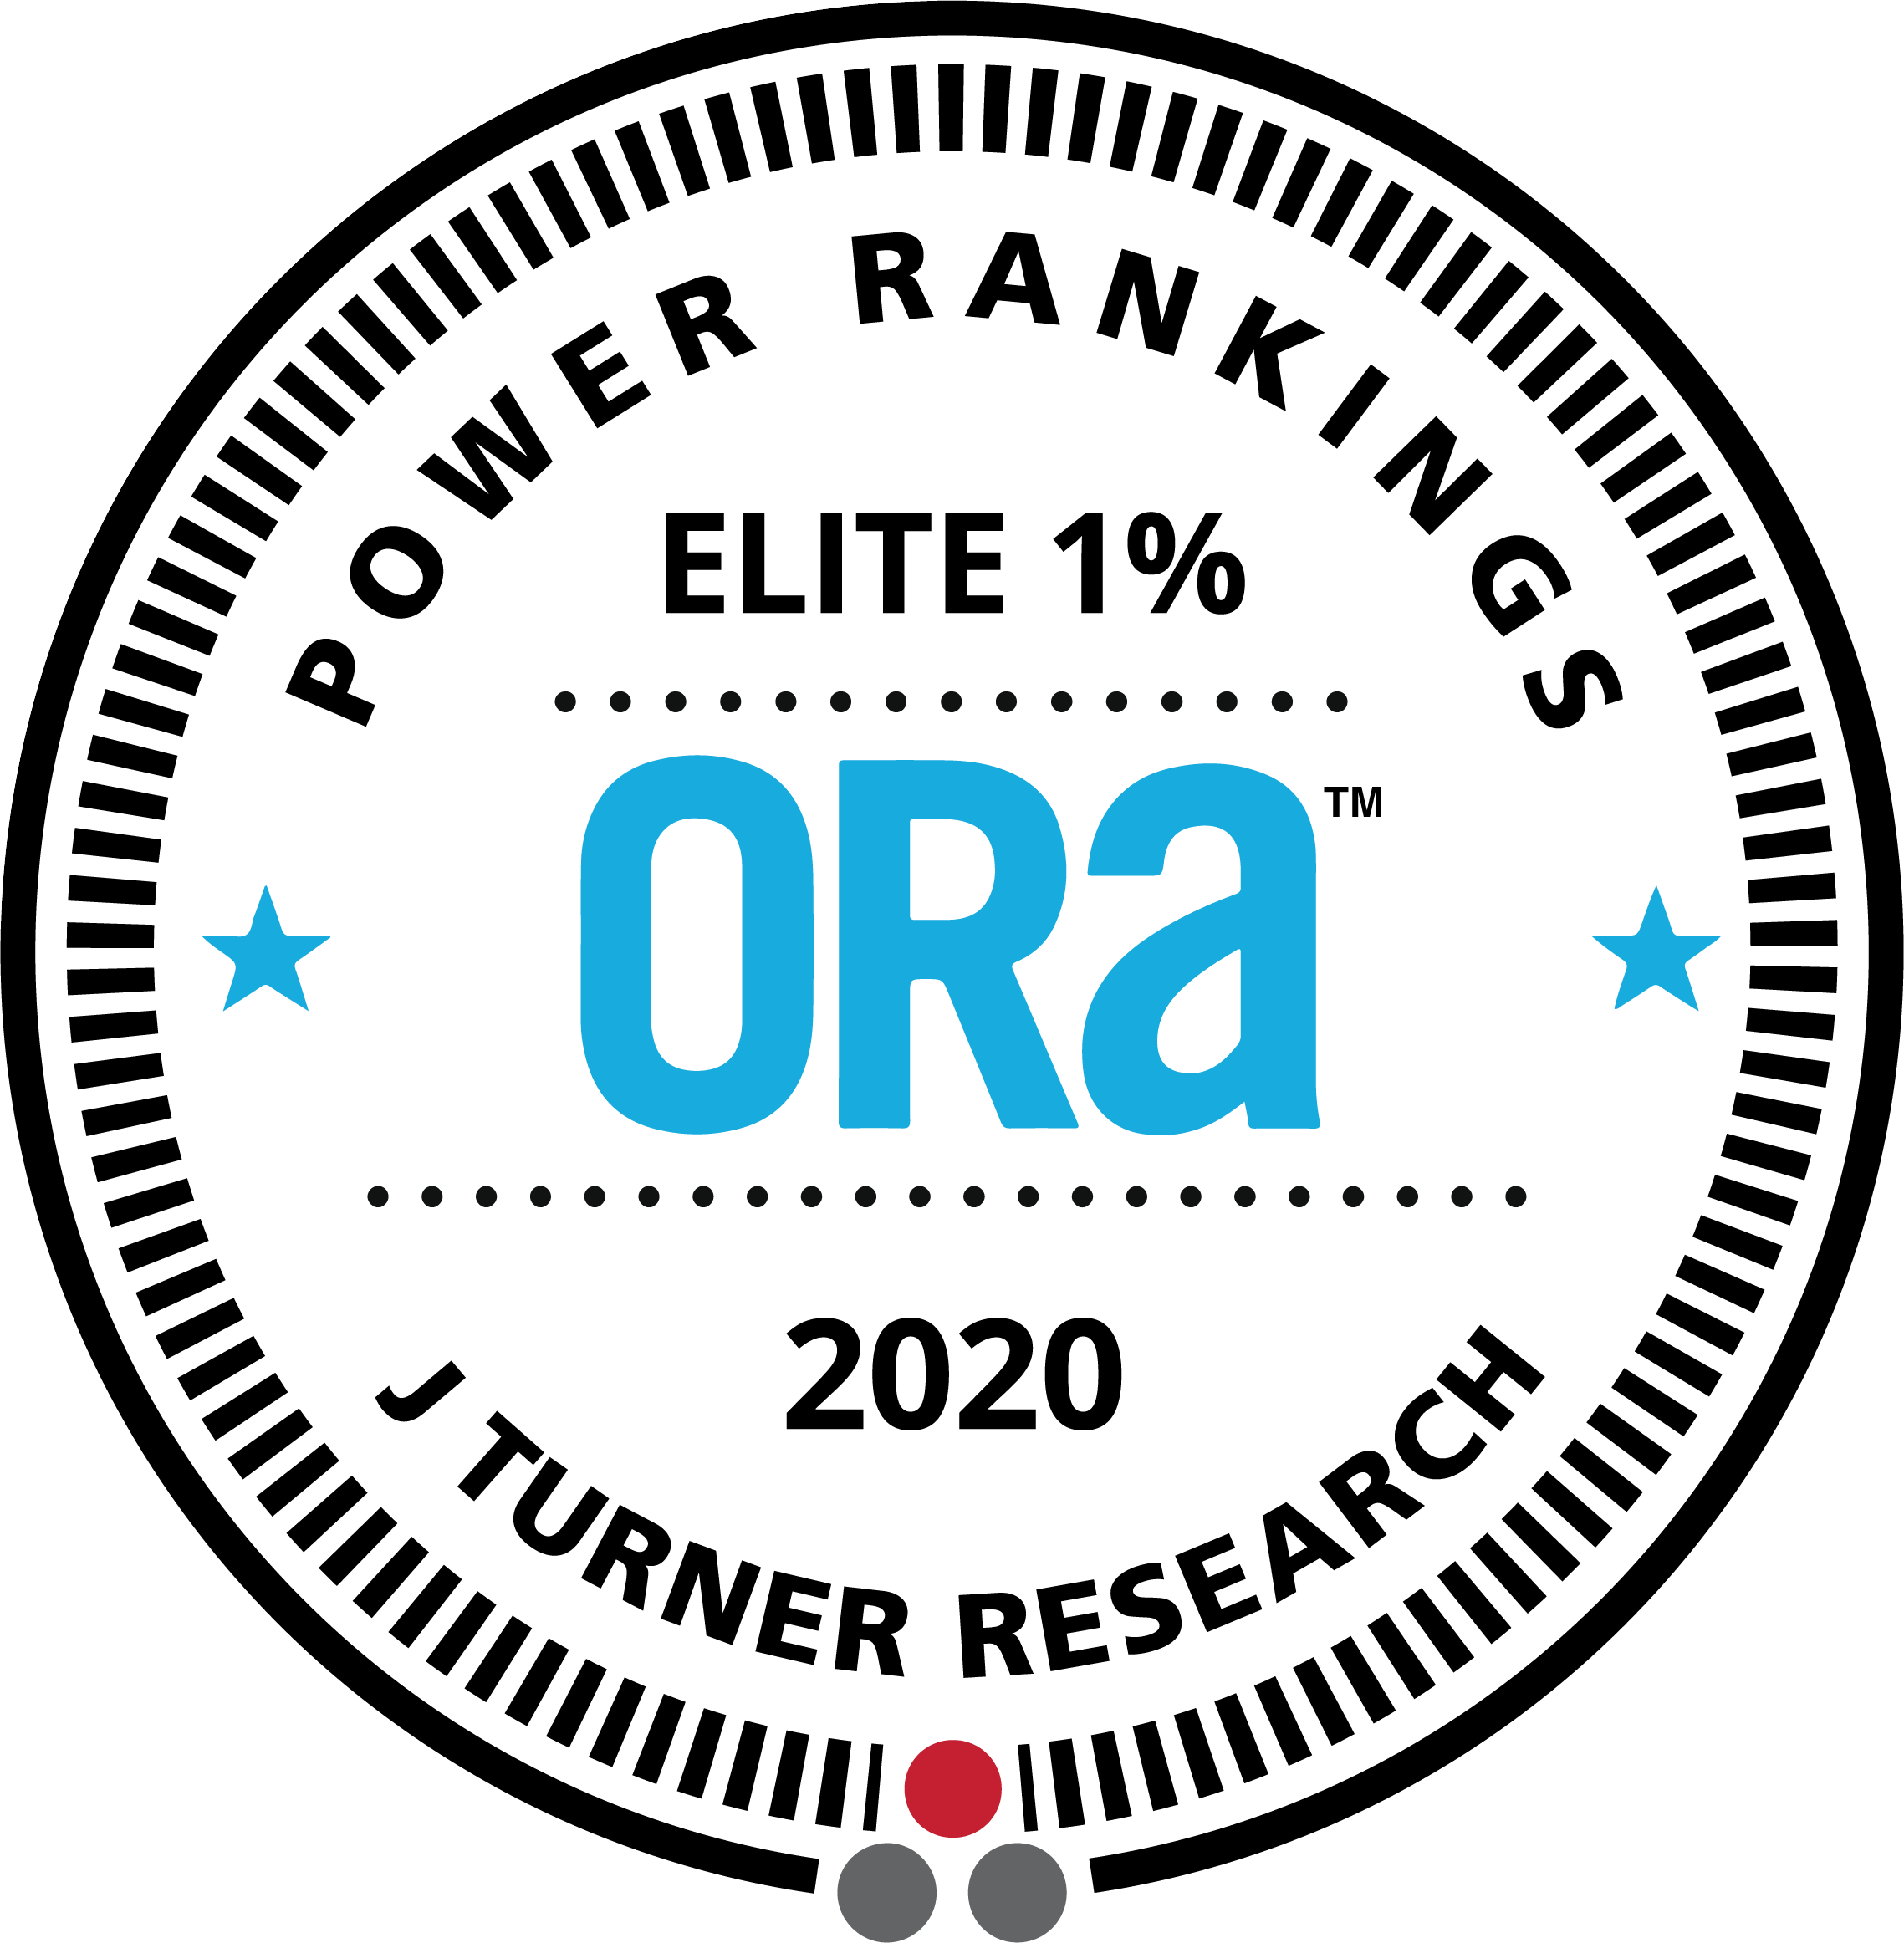 Logo for ORA: one percent elite power ranking. This property is in the top 100 nationwide by online reputation according to J Turner Research